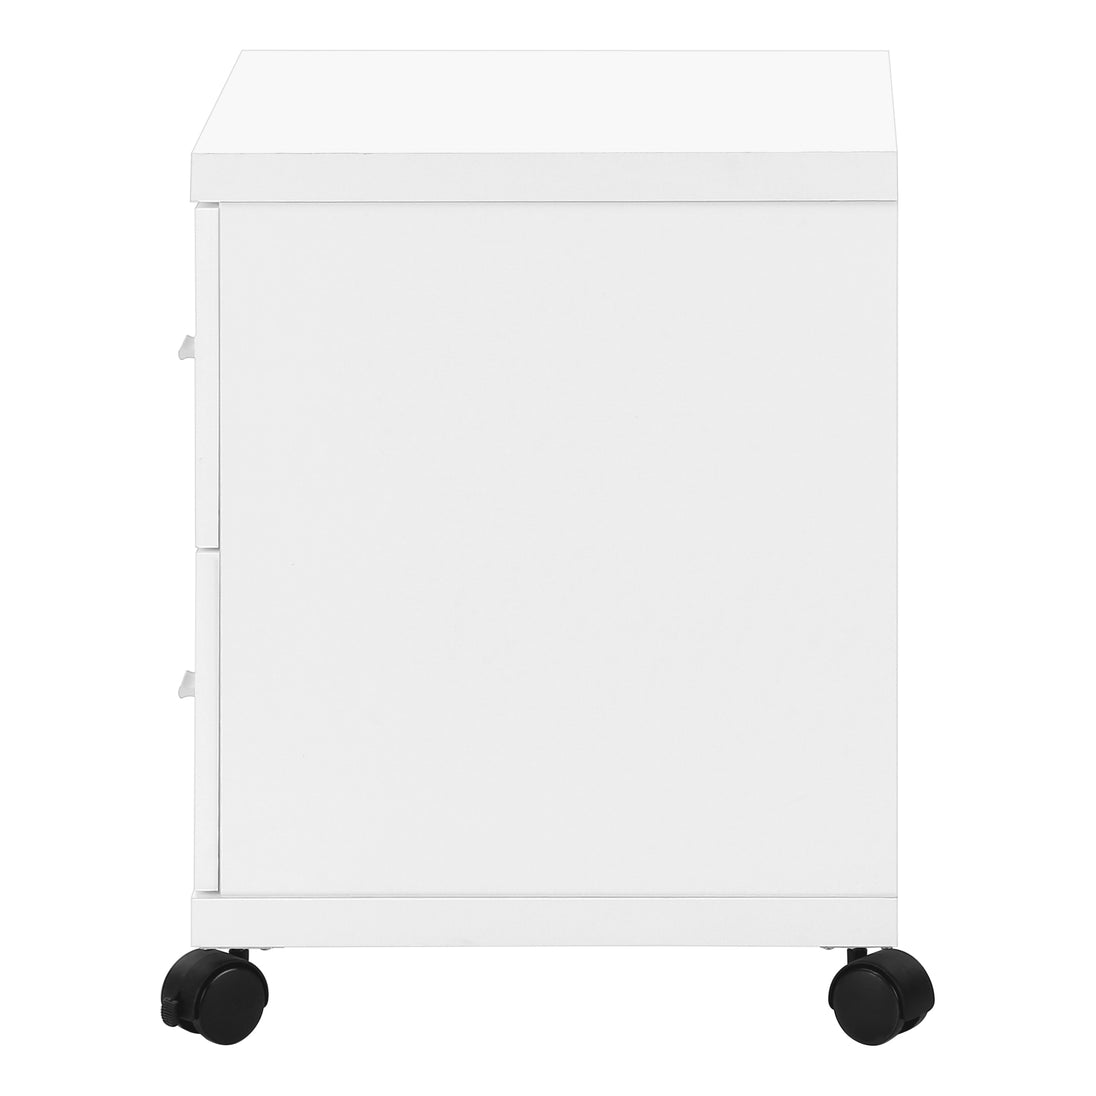 I 7055 Office Cabinet - White With 2 Drawers On Castors - Furniture Depot (7881128149240)